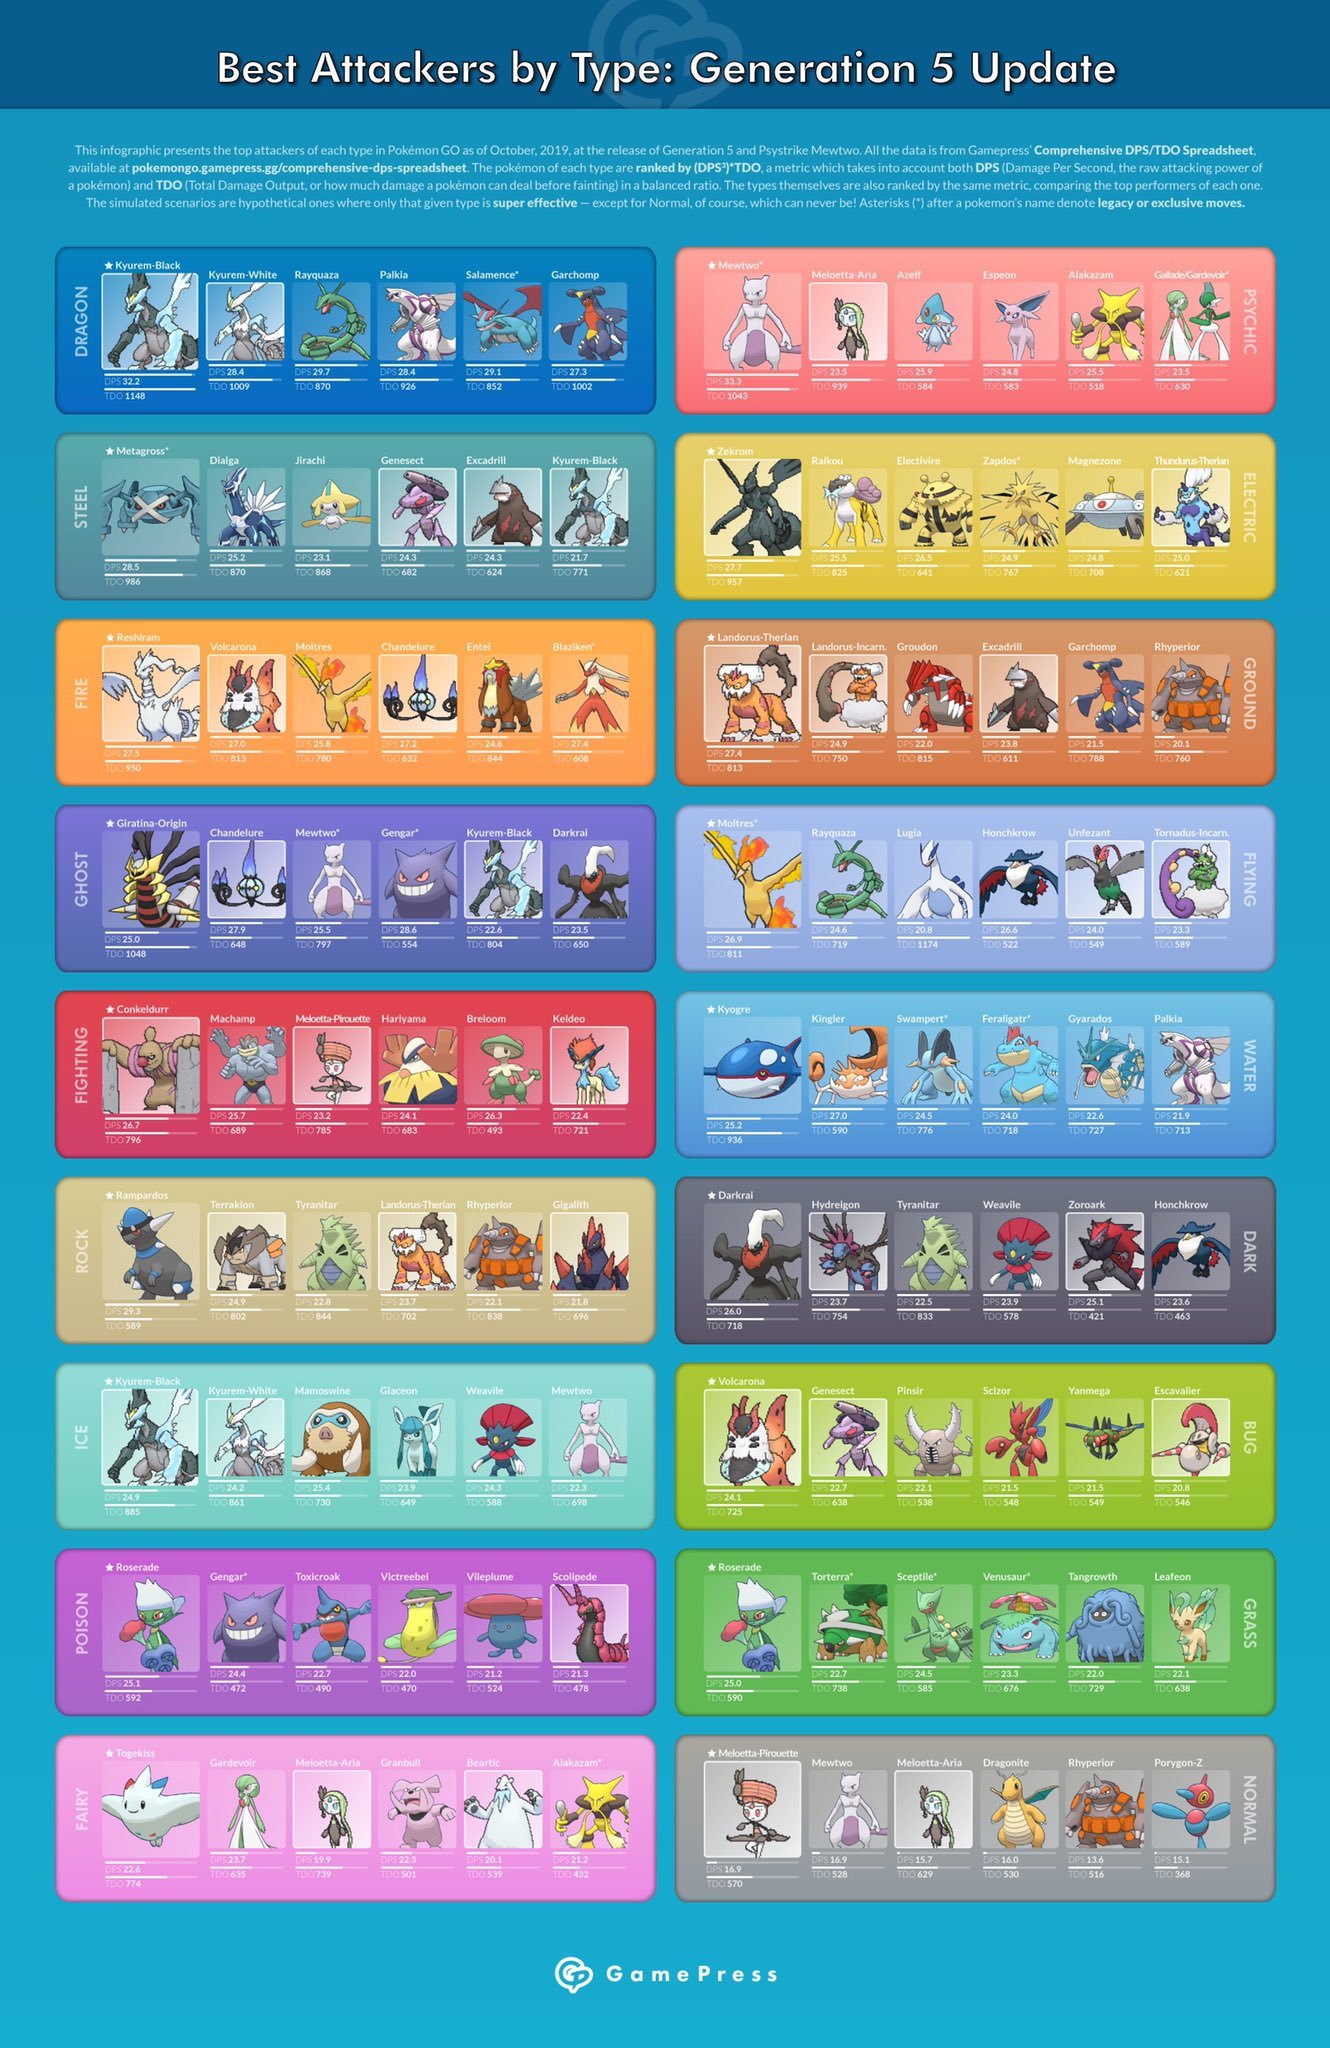 Made a Top 5 Pokemon by type infographic for my discord